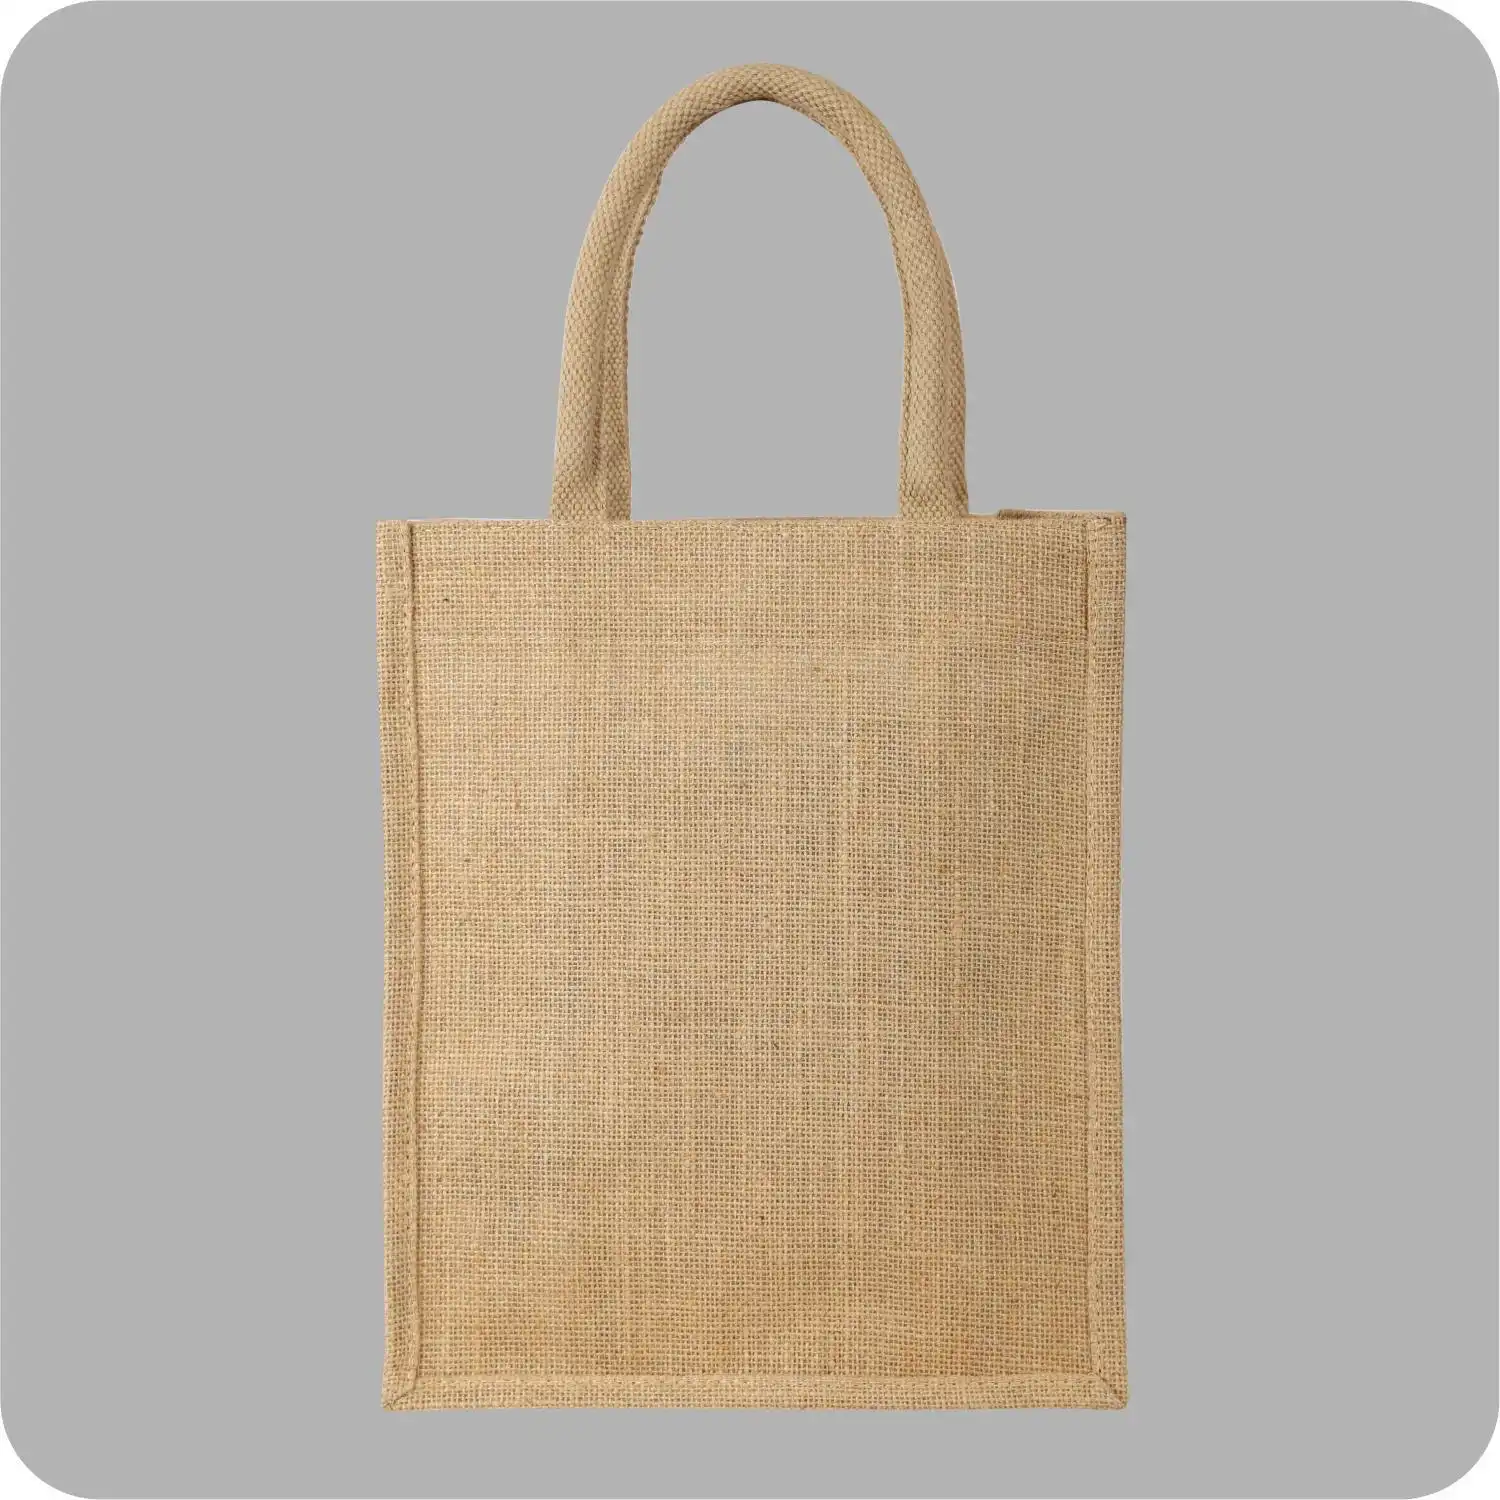 Exclusive Designed Khaki Colored 100% Jute bags Made for Unisex 